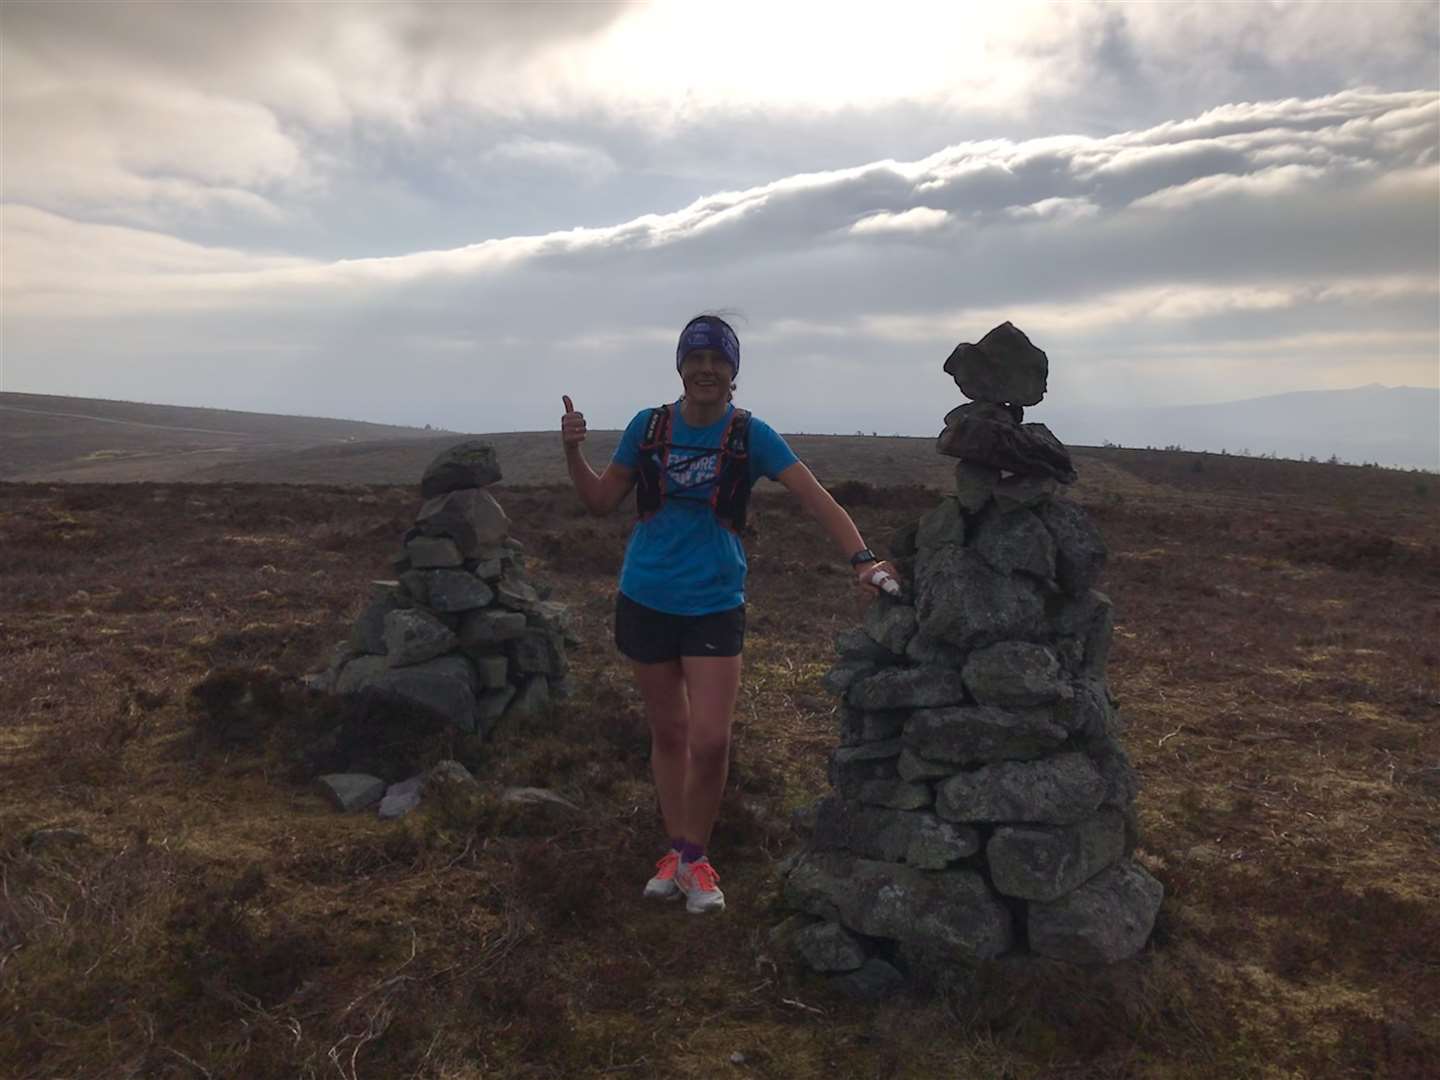 Jacoline at the top of Red Hill just off Gartly Moor after clocking up 18 miles last Saturday.